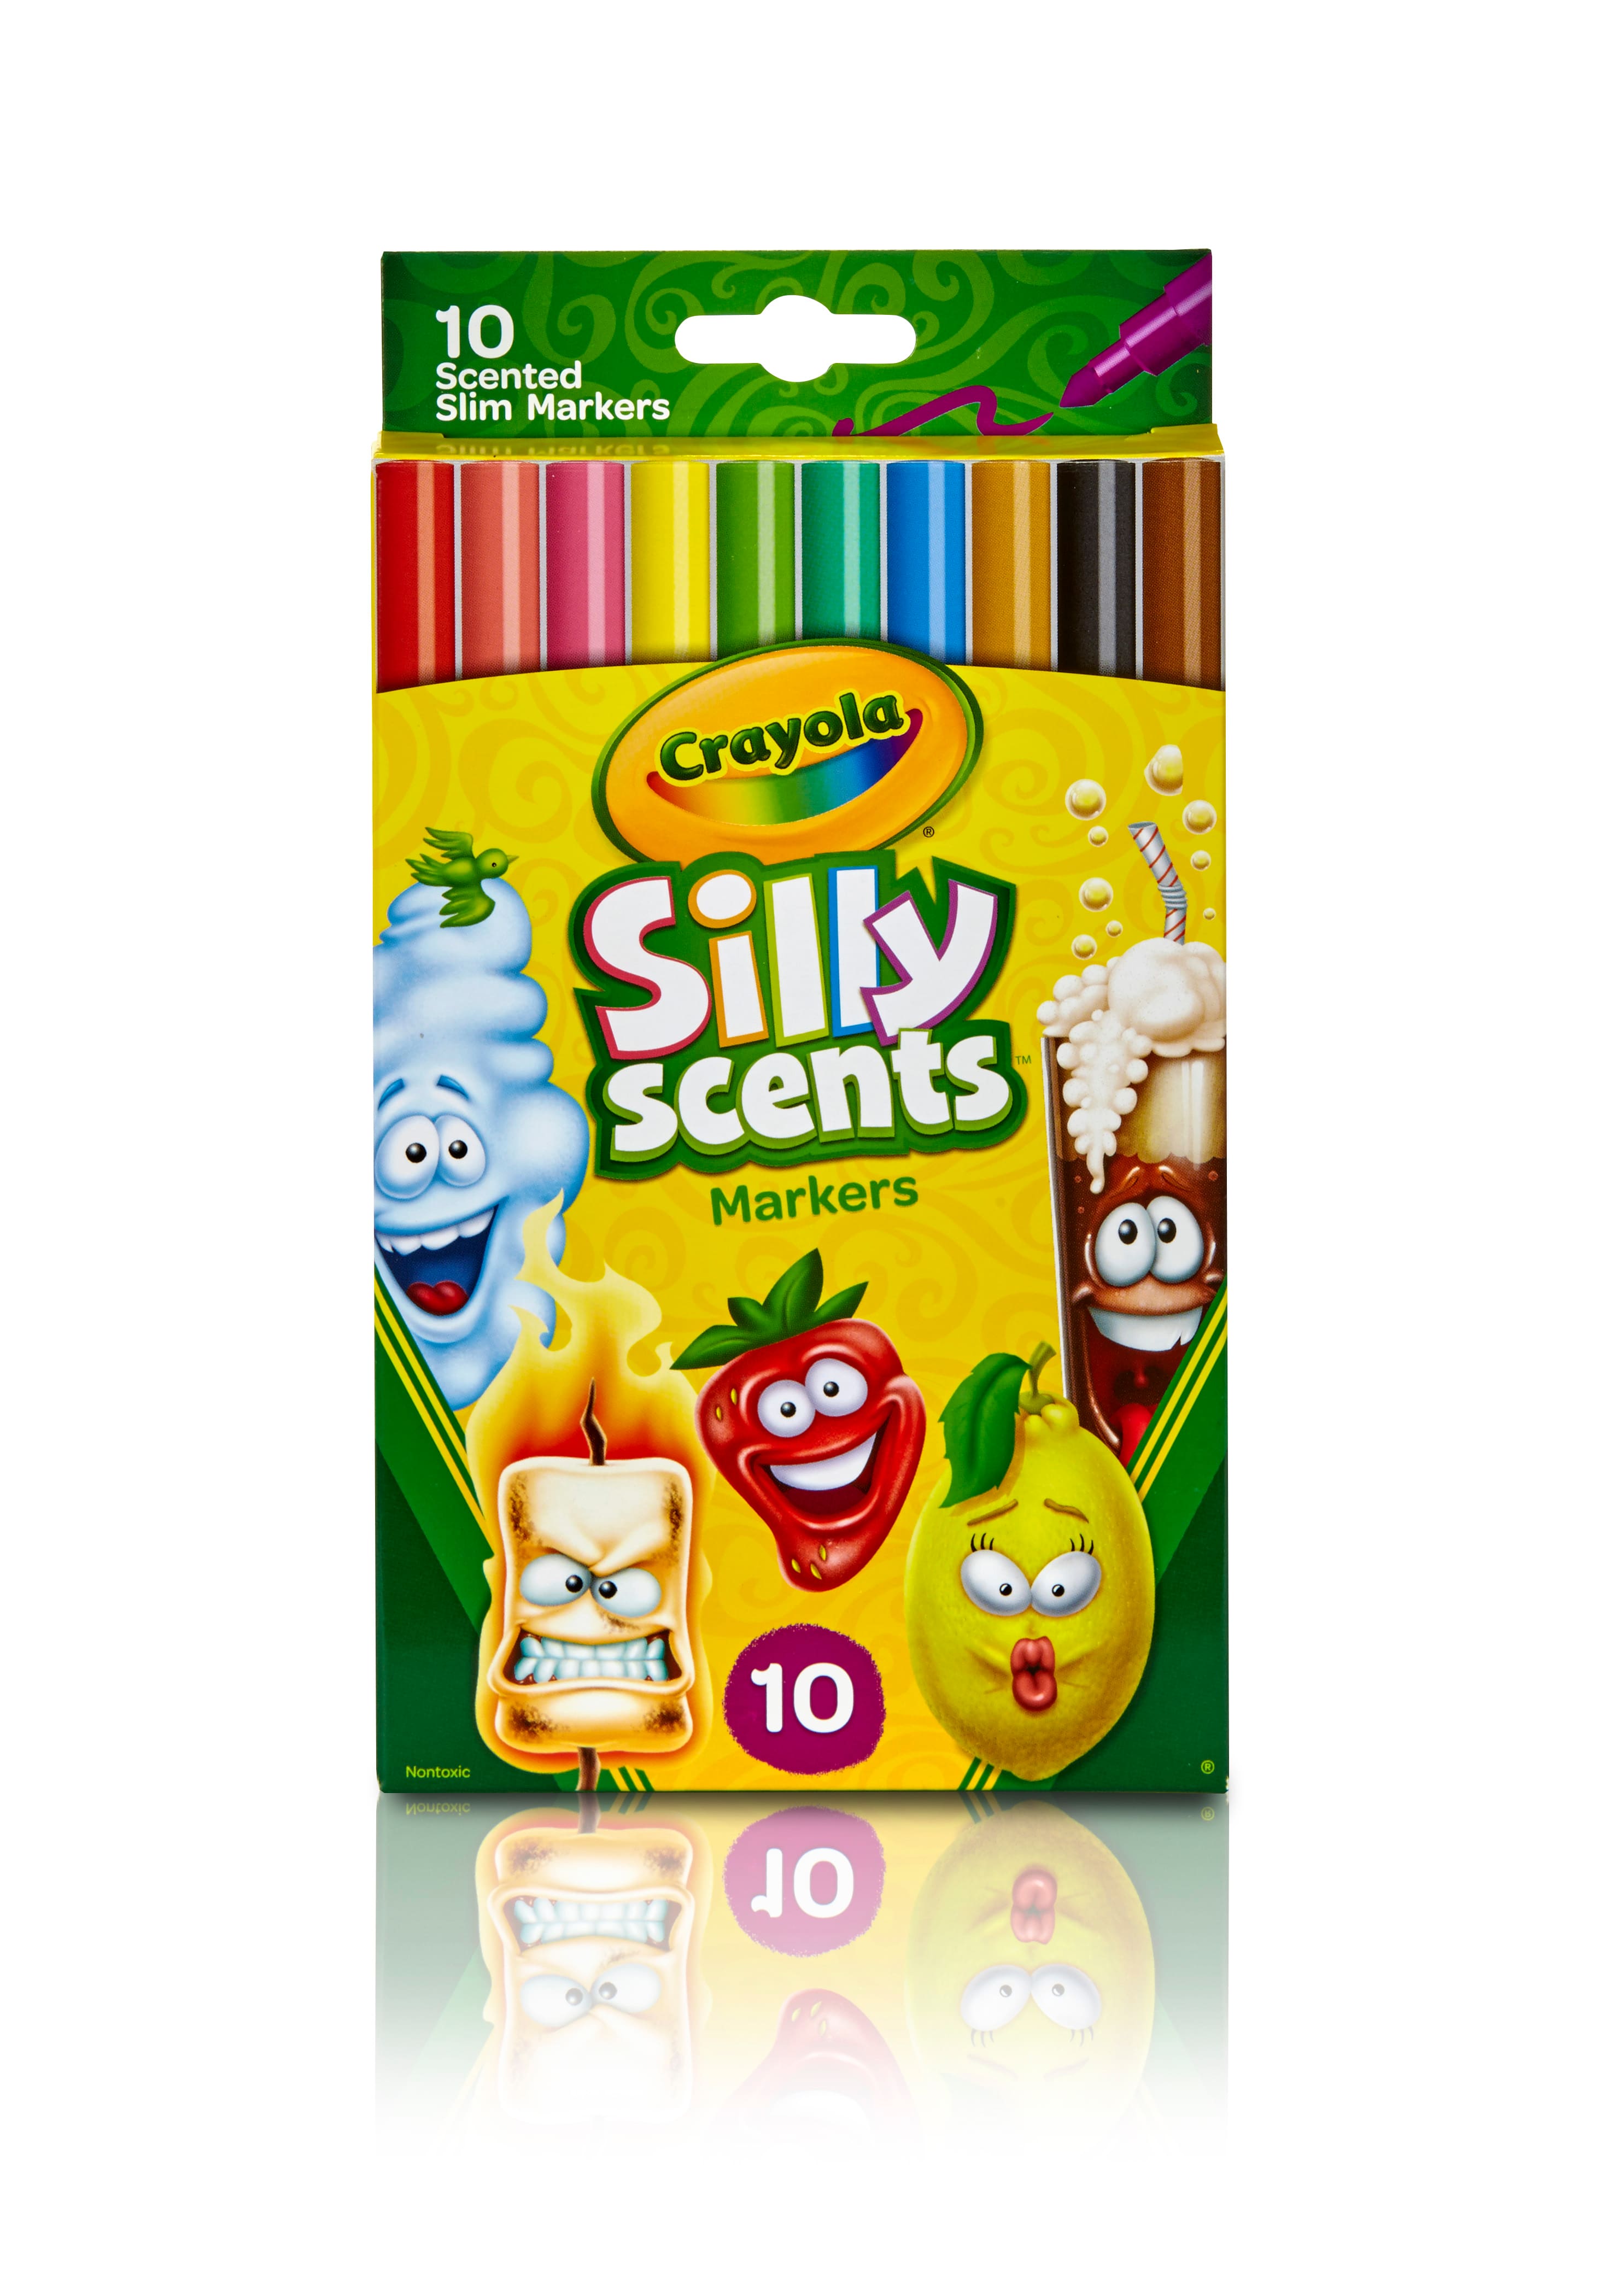 Make Your Own Silly Scented Markers With This Crayola Set - The Toy Insider